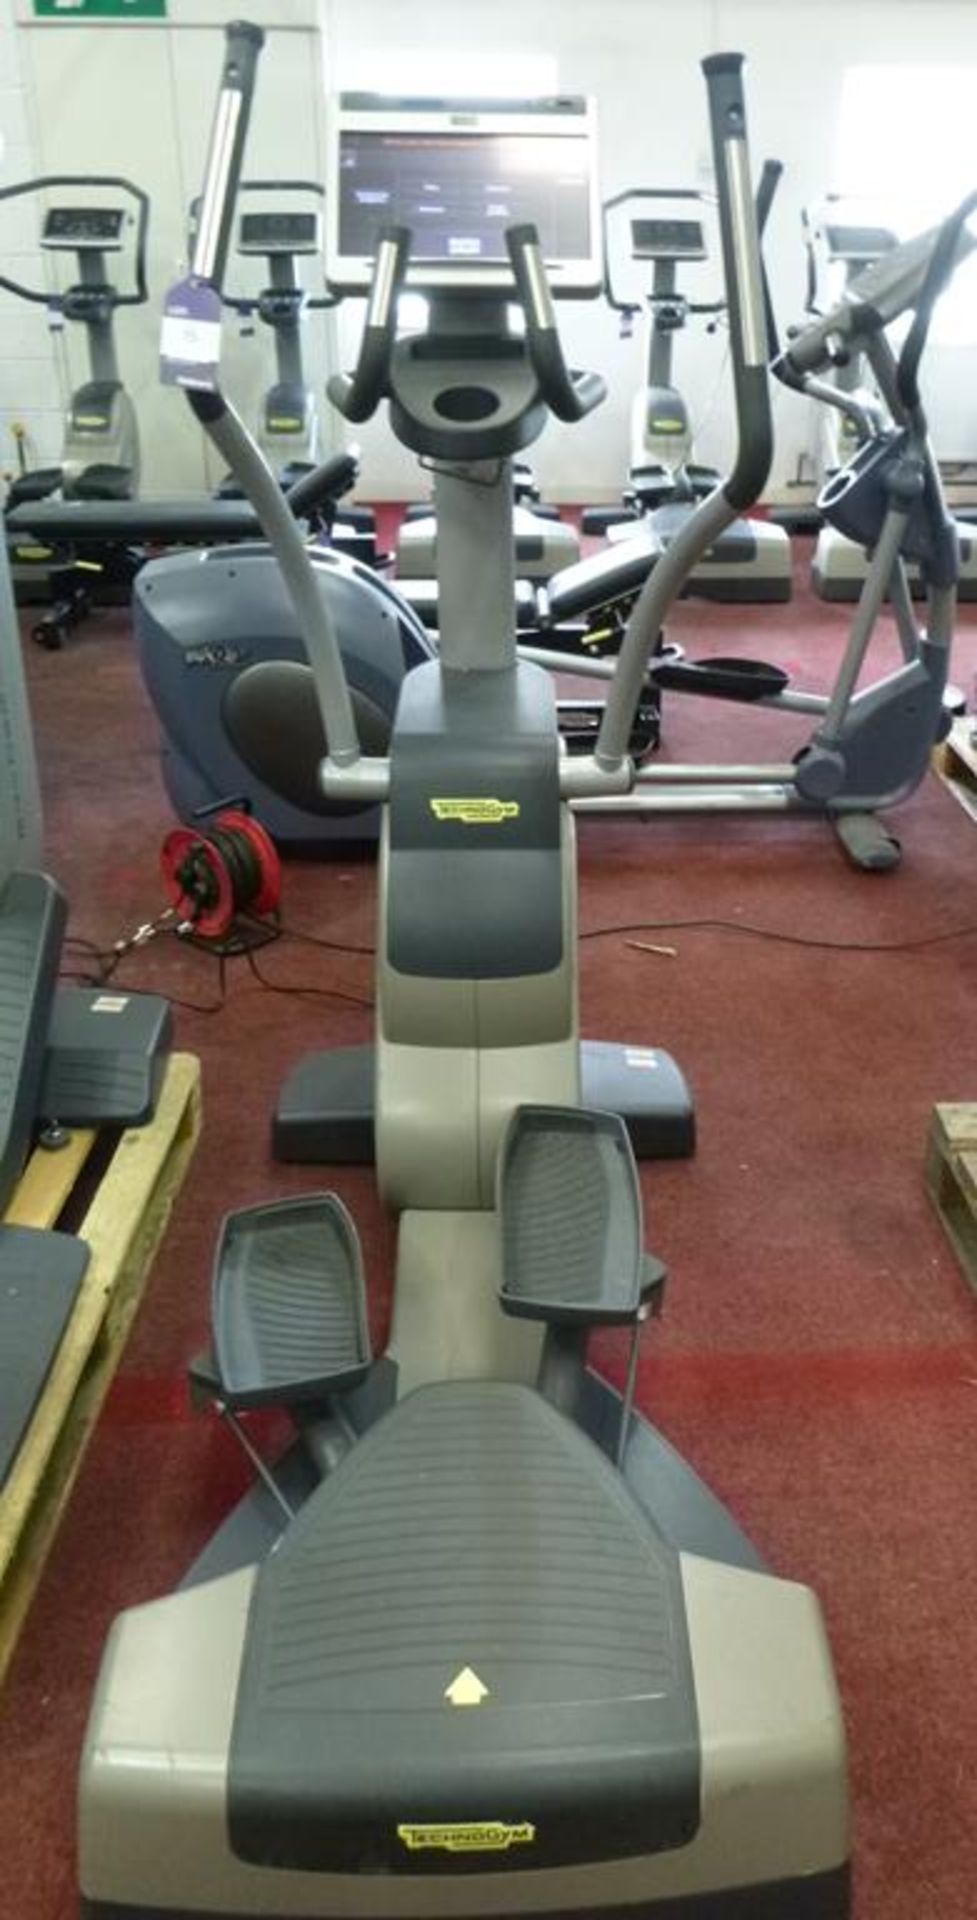 * A TechnoGym Crossover 700 complete with Touch Screen and iPod Dock s/n DAG73Y13000529 Yom 09/13. - Image 2 of 4